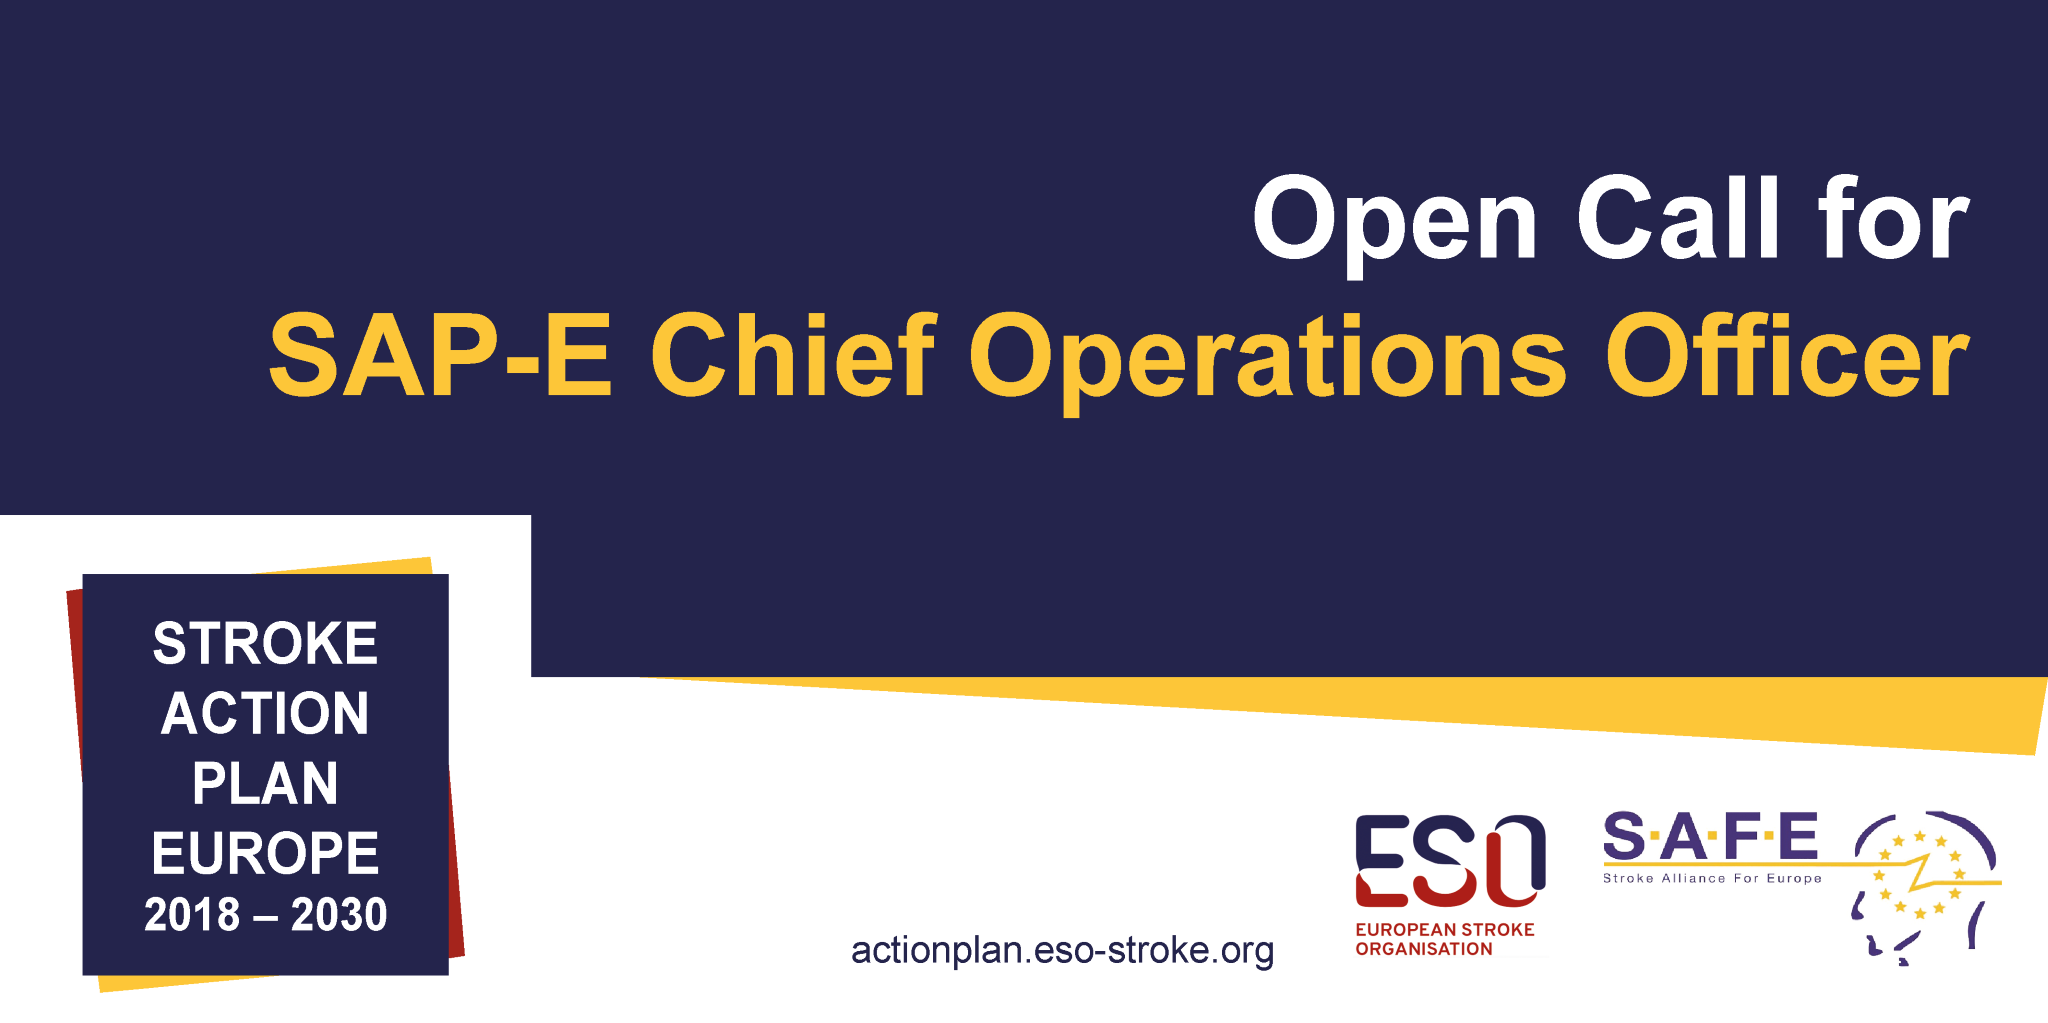 Open call for the Chief Operations Officer of the Stroke Action Plan for Europe